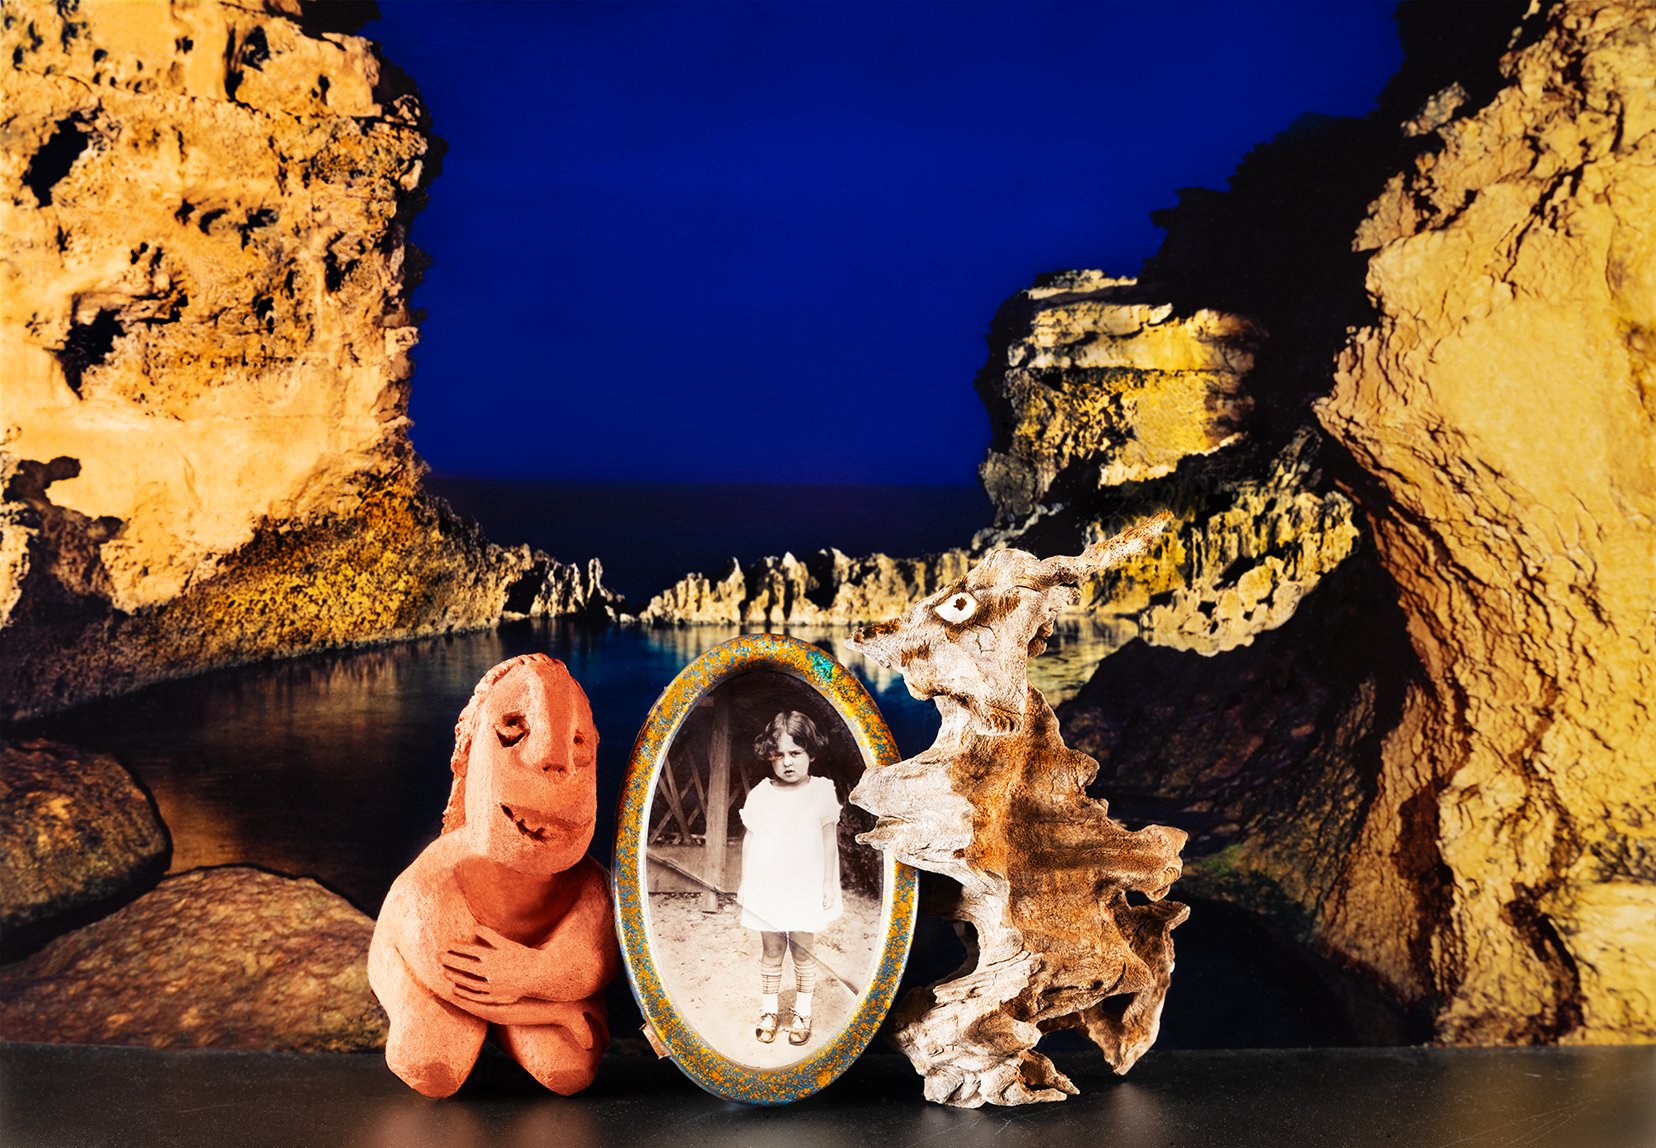    Chance Encounters    An Imaginary Journey: A Girl &amp;    Her Friends ‘Clay’ &amp; ‘Drifter’ with a Backdrop by Her  Future Son  2023 (Backdrop: Ed Douglas,  The  Grotto,  Great Ocean Road, VIC c1980) 64cm X 92.5cm Archival pigment print  on 310g